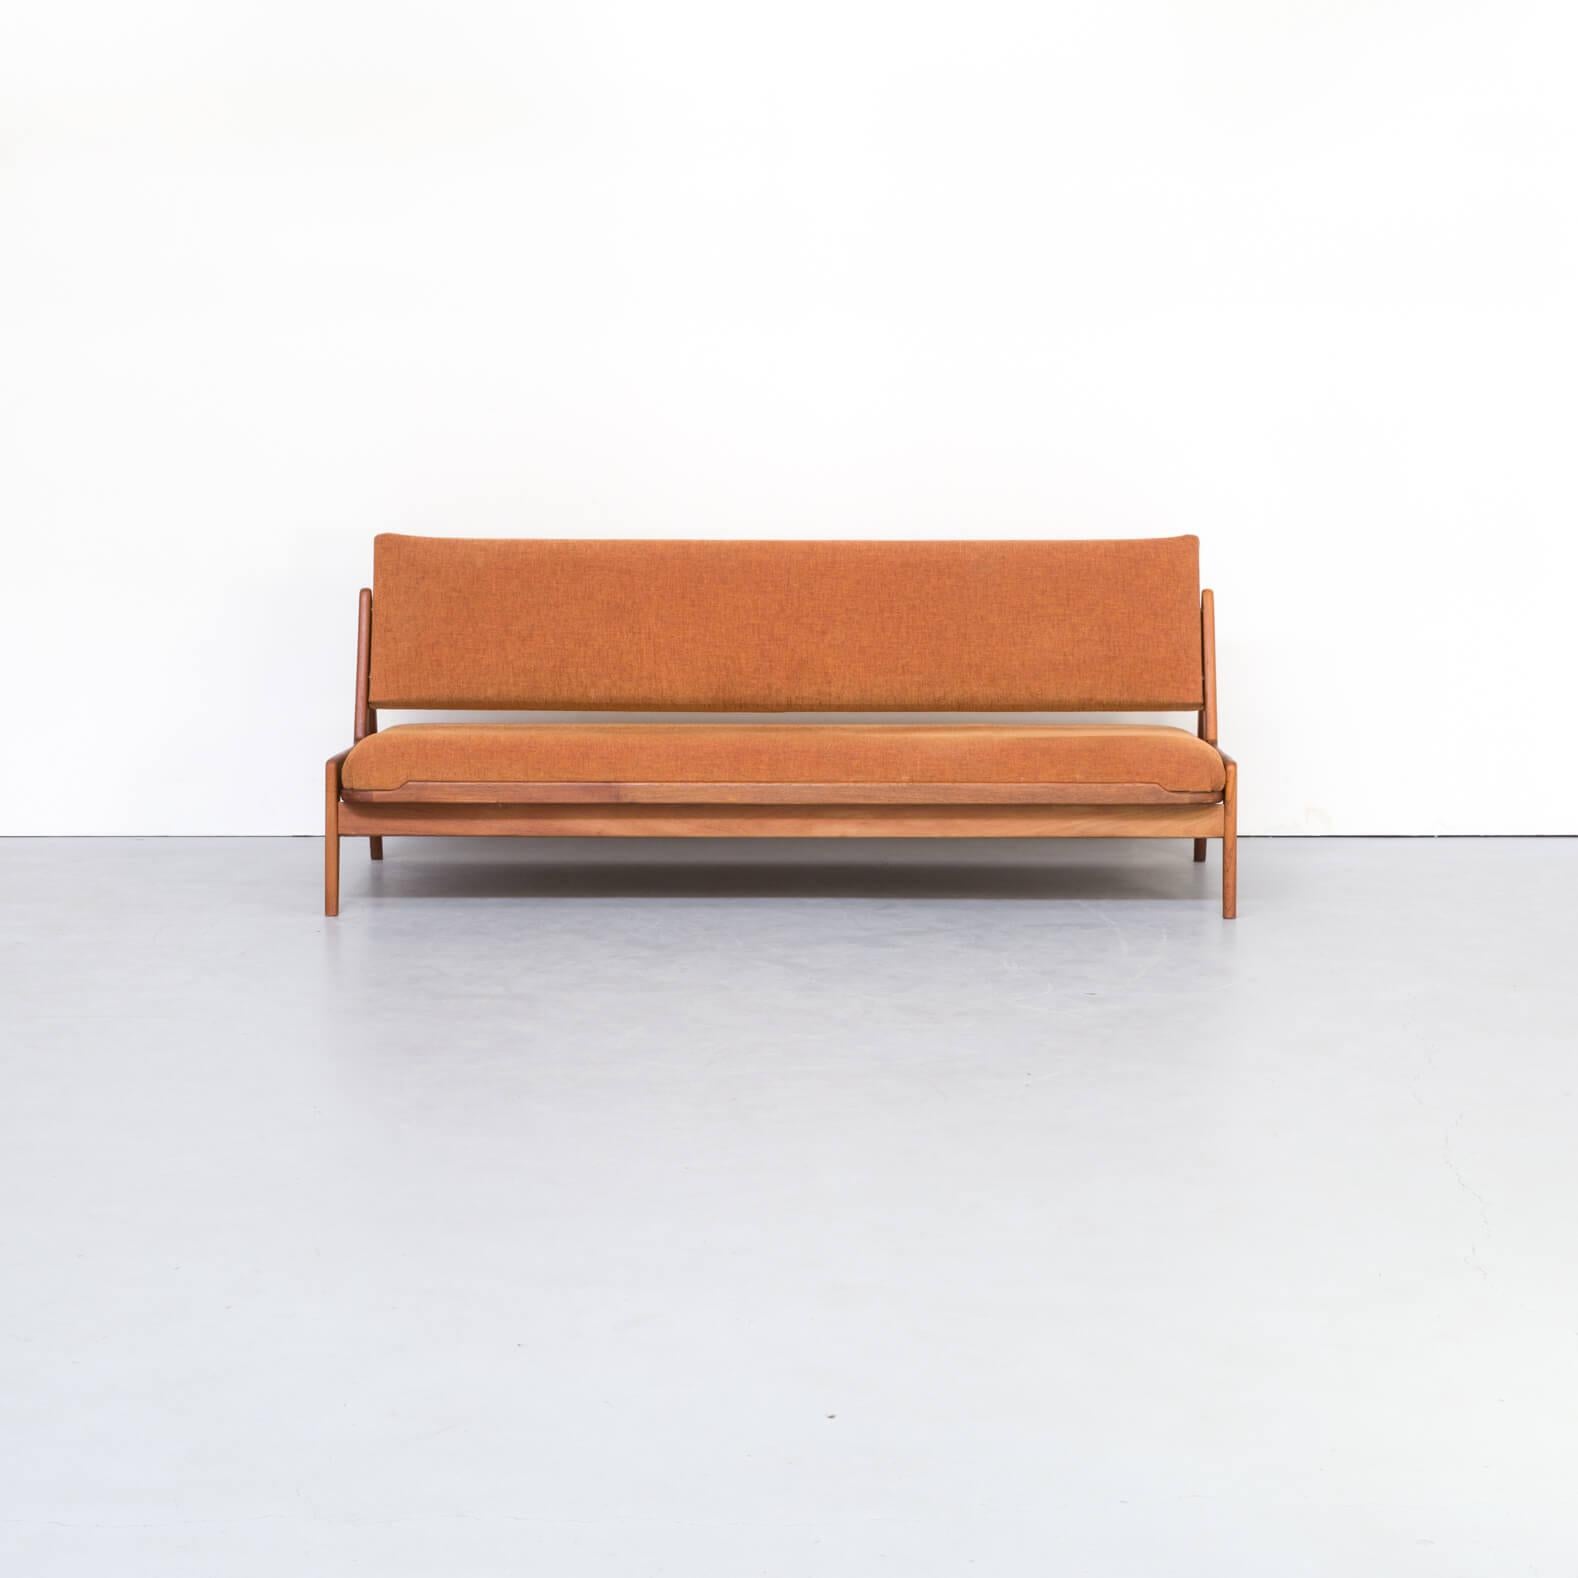 1960s Arne Wahl Iversen daybed sofa for Komfort, Denmark. Danish architect-designer Arne Wahl Iversen can be counted among a significant number of Mid-Century Modern Scandinavian designers whose works, despite a scarcity of biographical information,